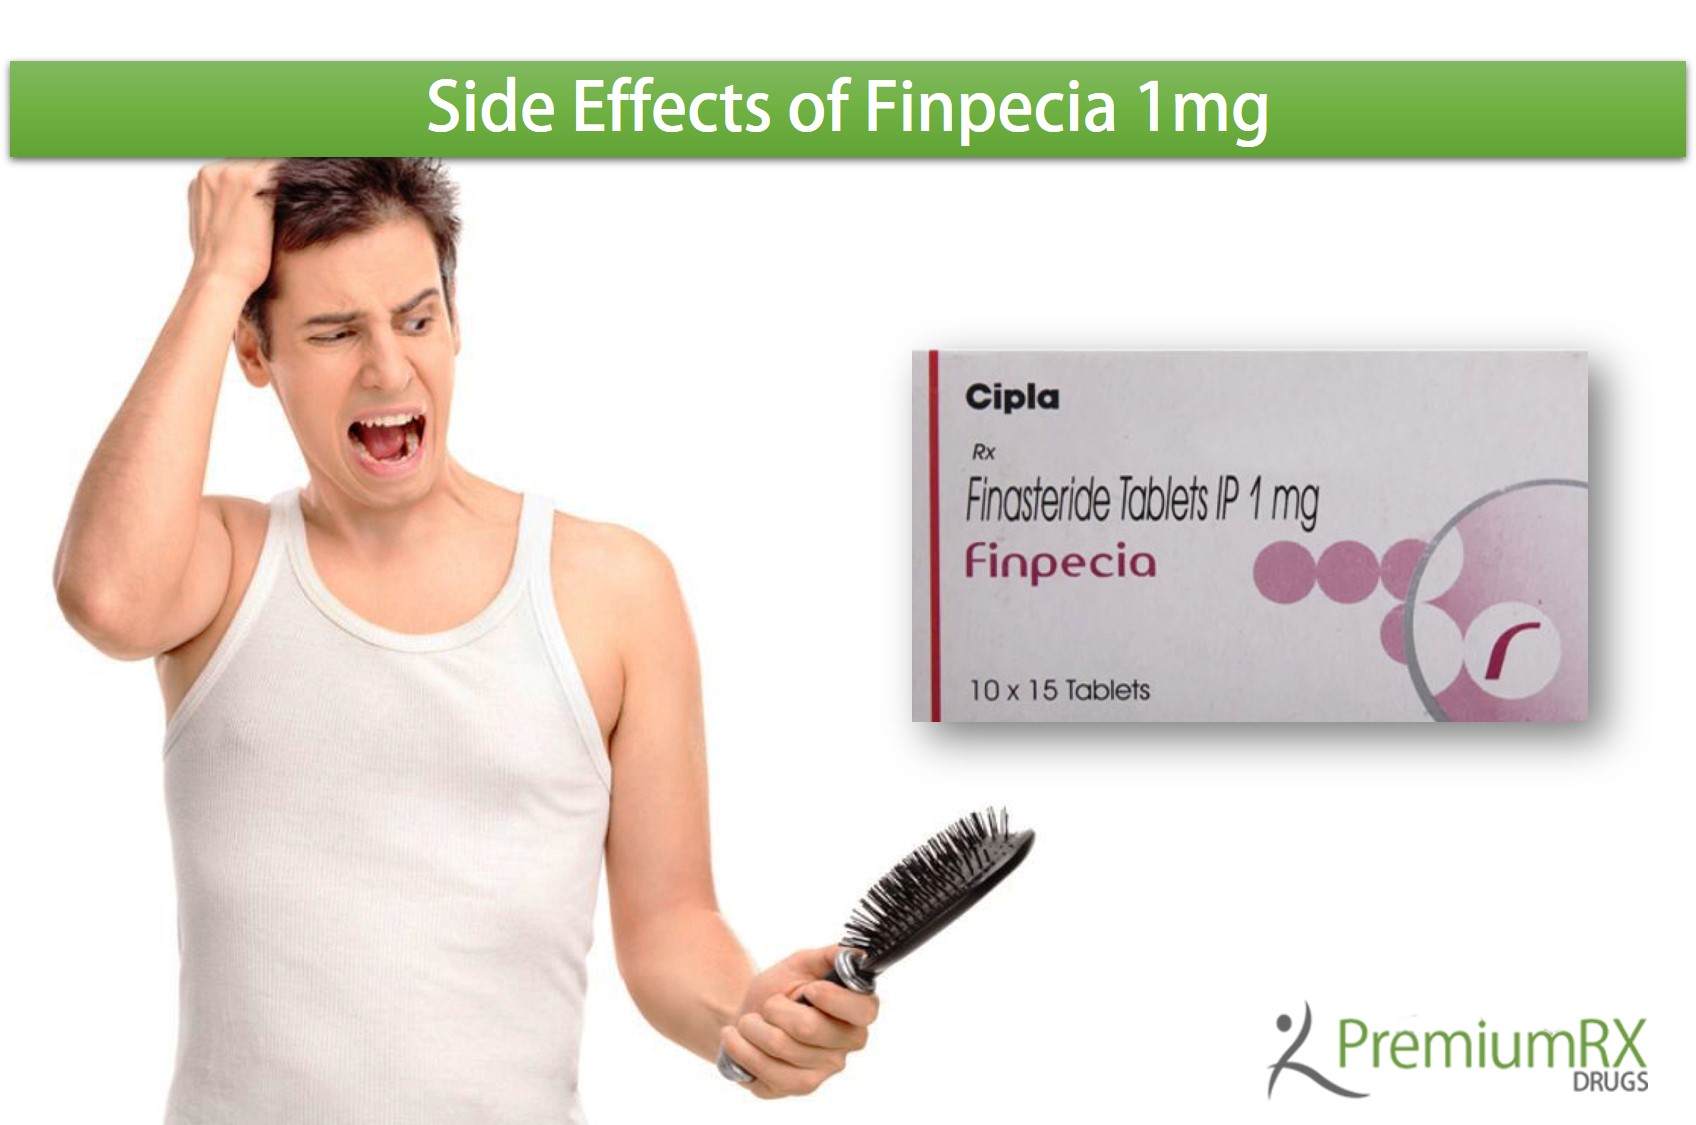 Side Effects of Finpecia 1mg Tablets